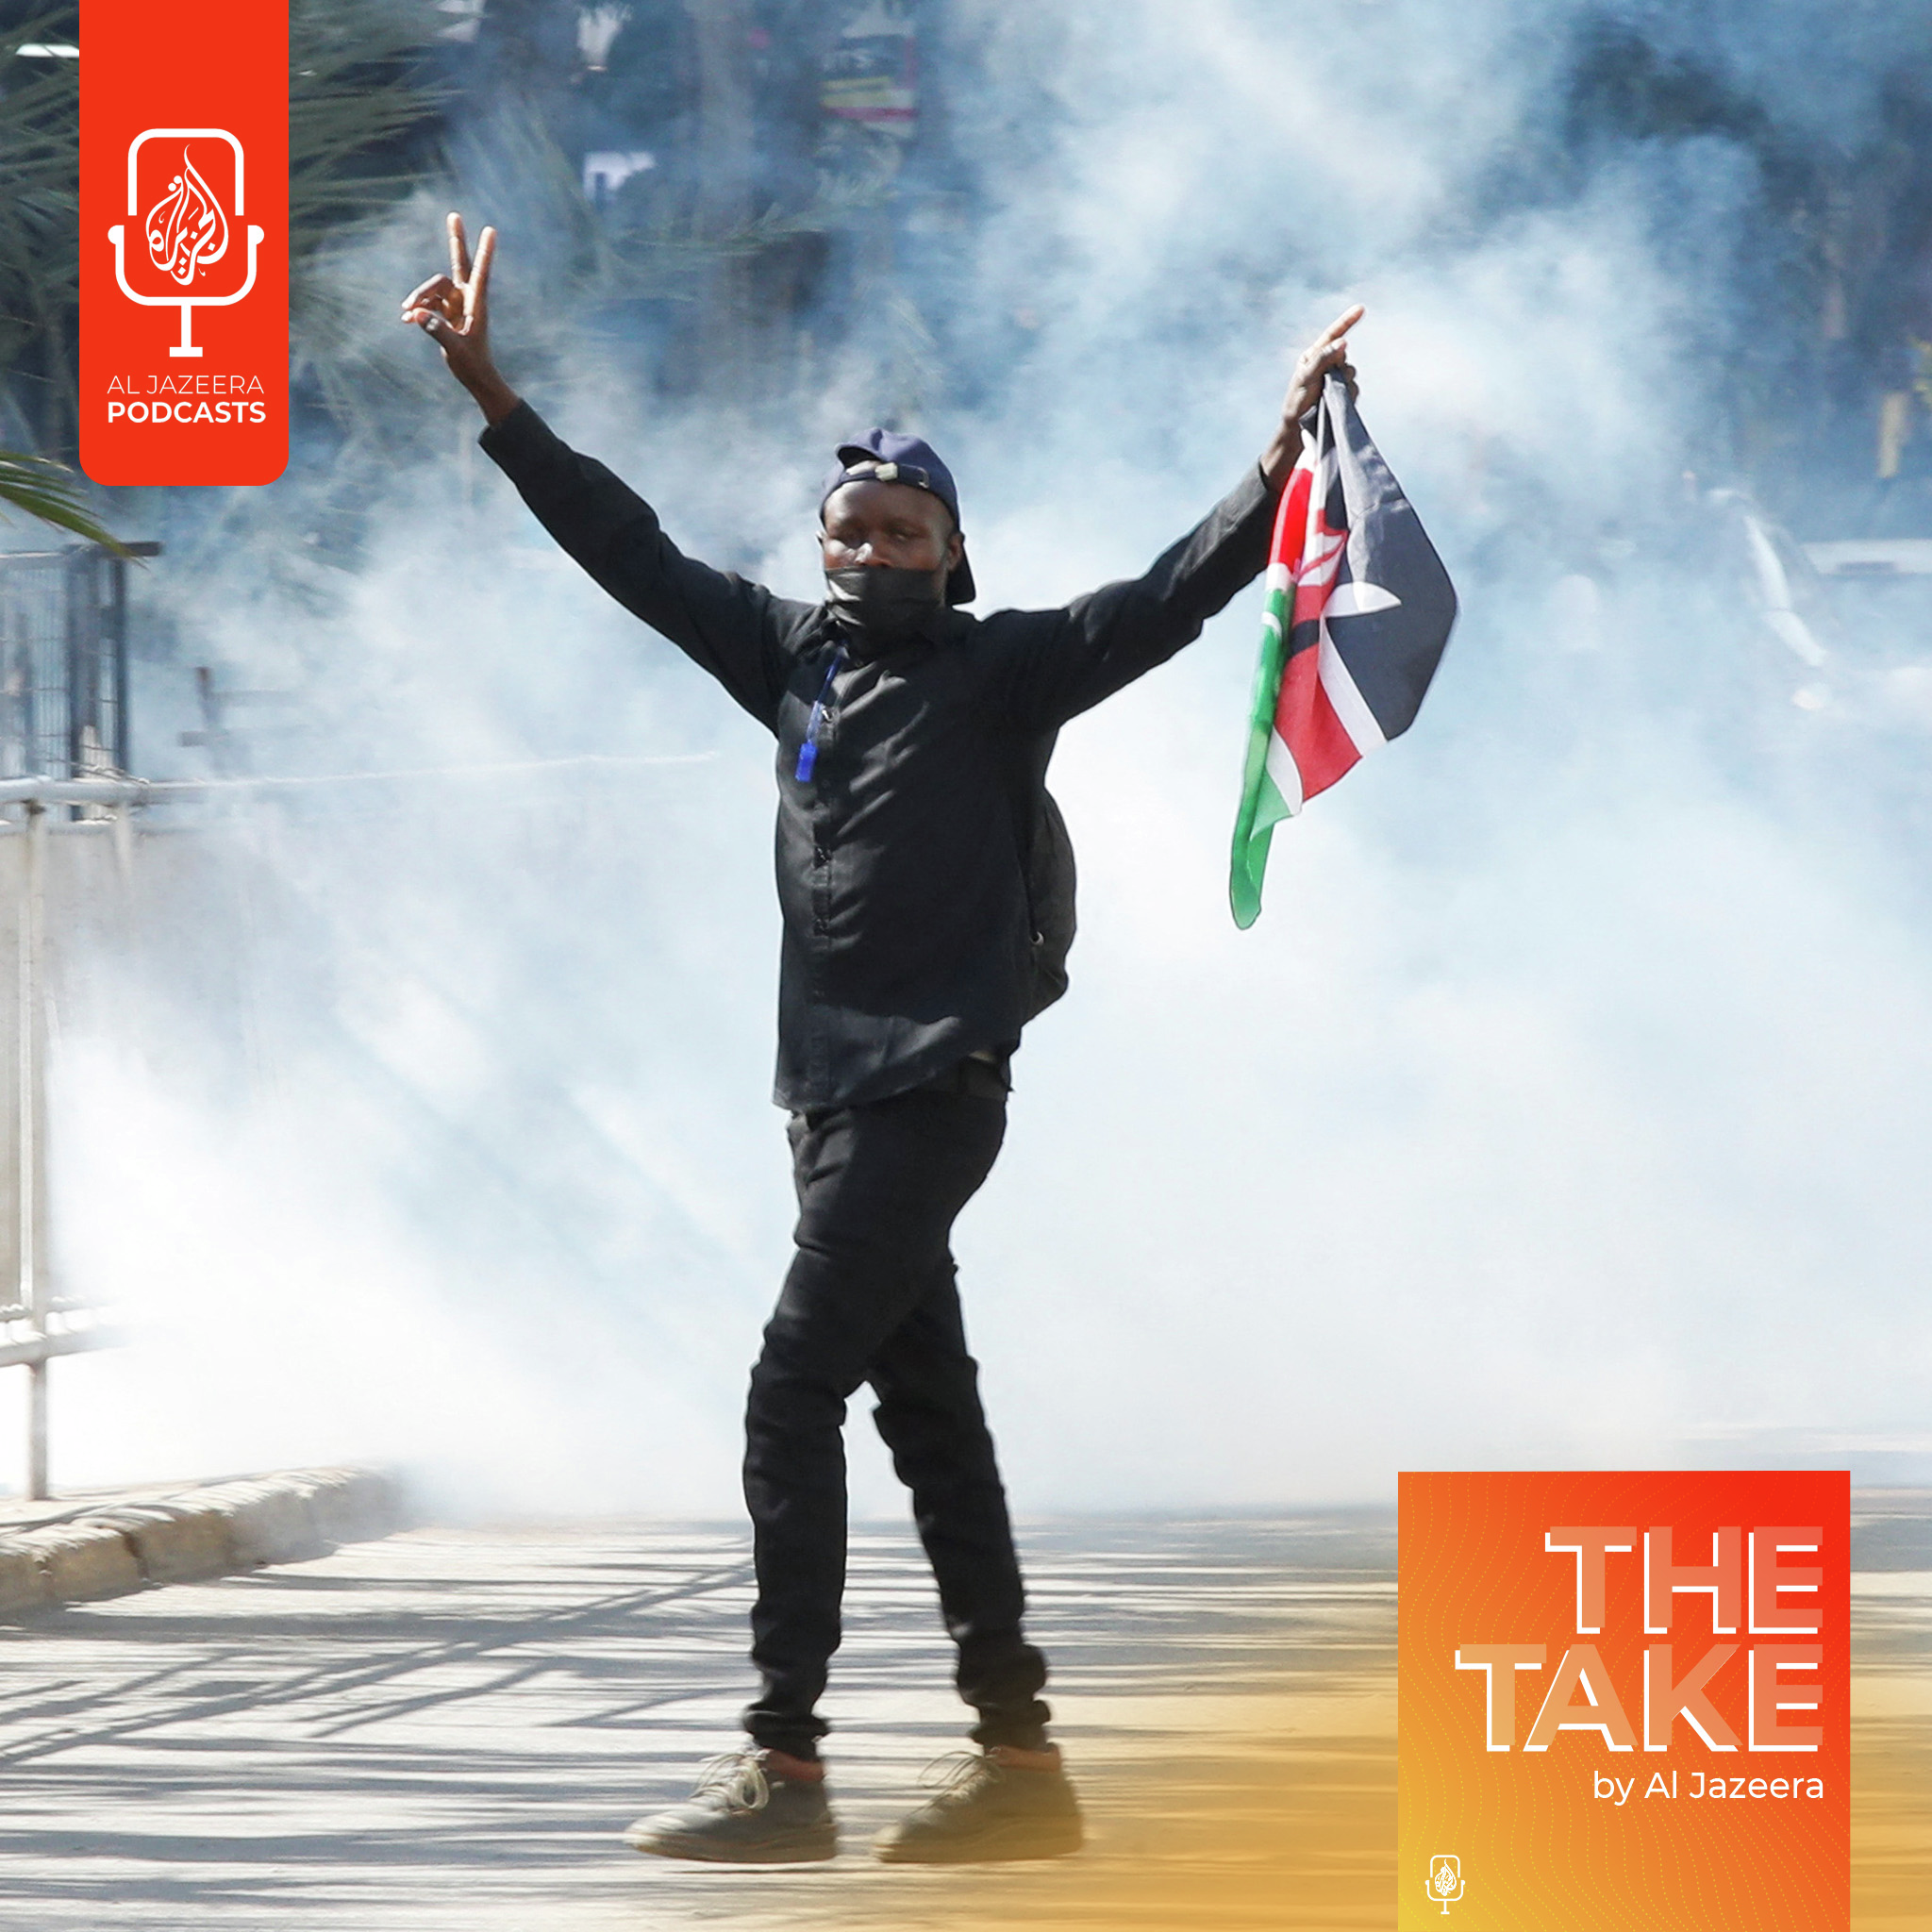 What triggered the protests in Kenya?